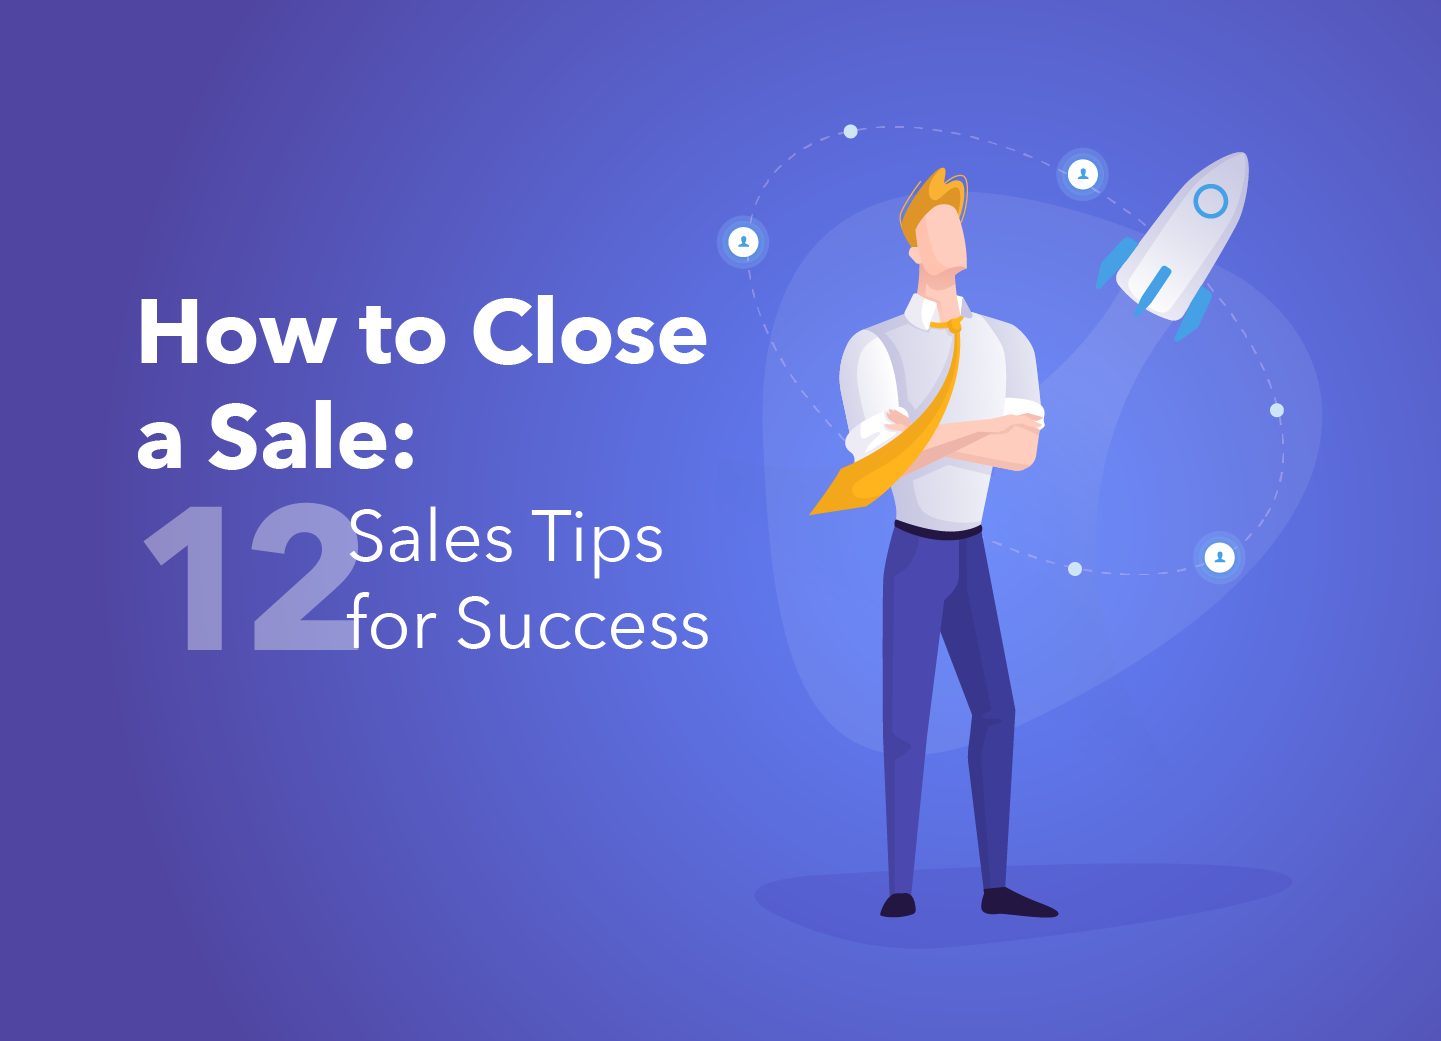 How to close a sale – Tips and techniques